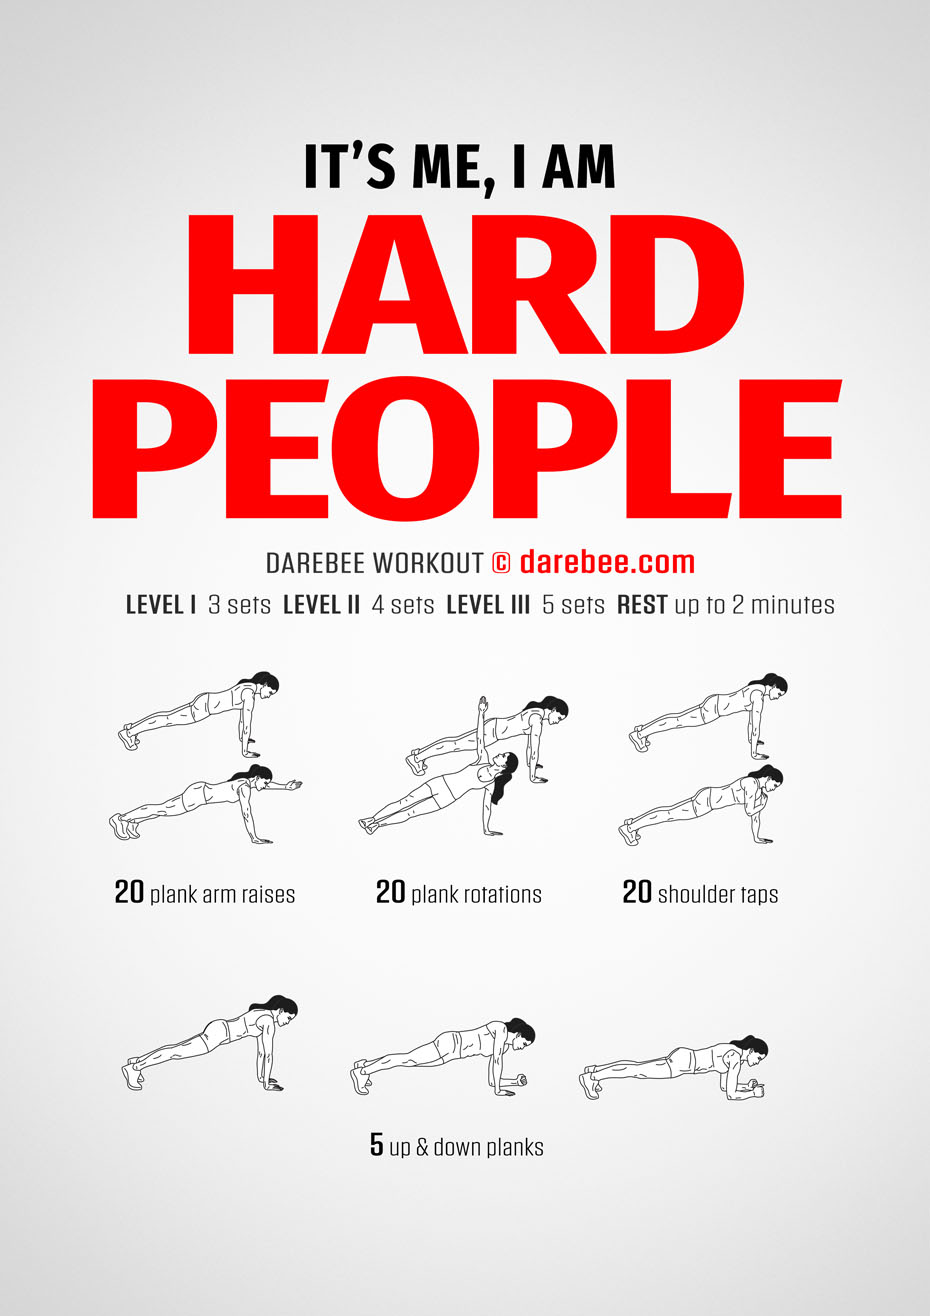  It's Me, I am Hard People is a Darebee home-fitness workout that targets abs and core.